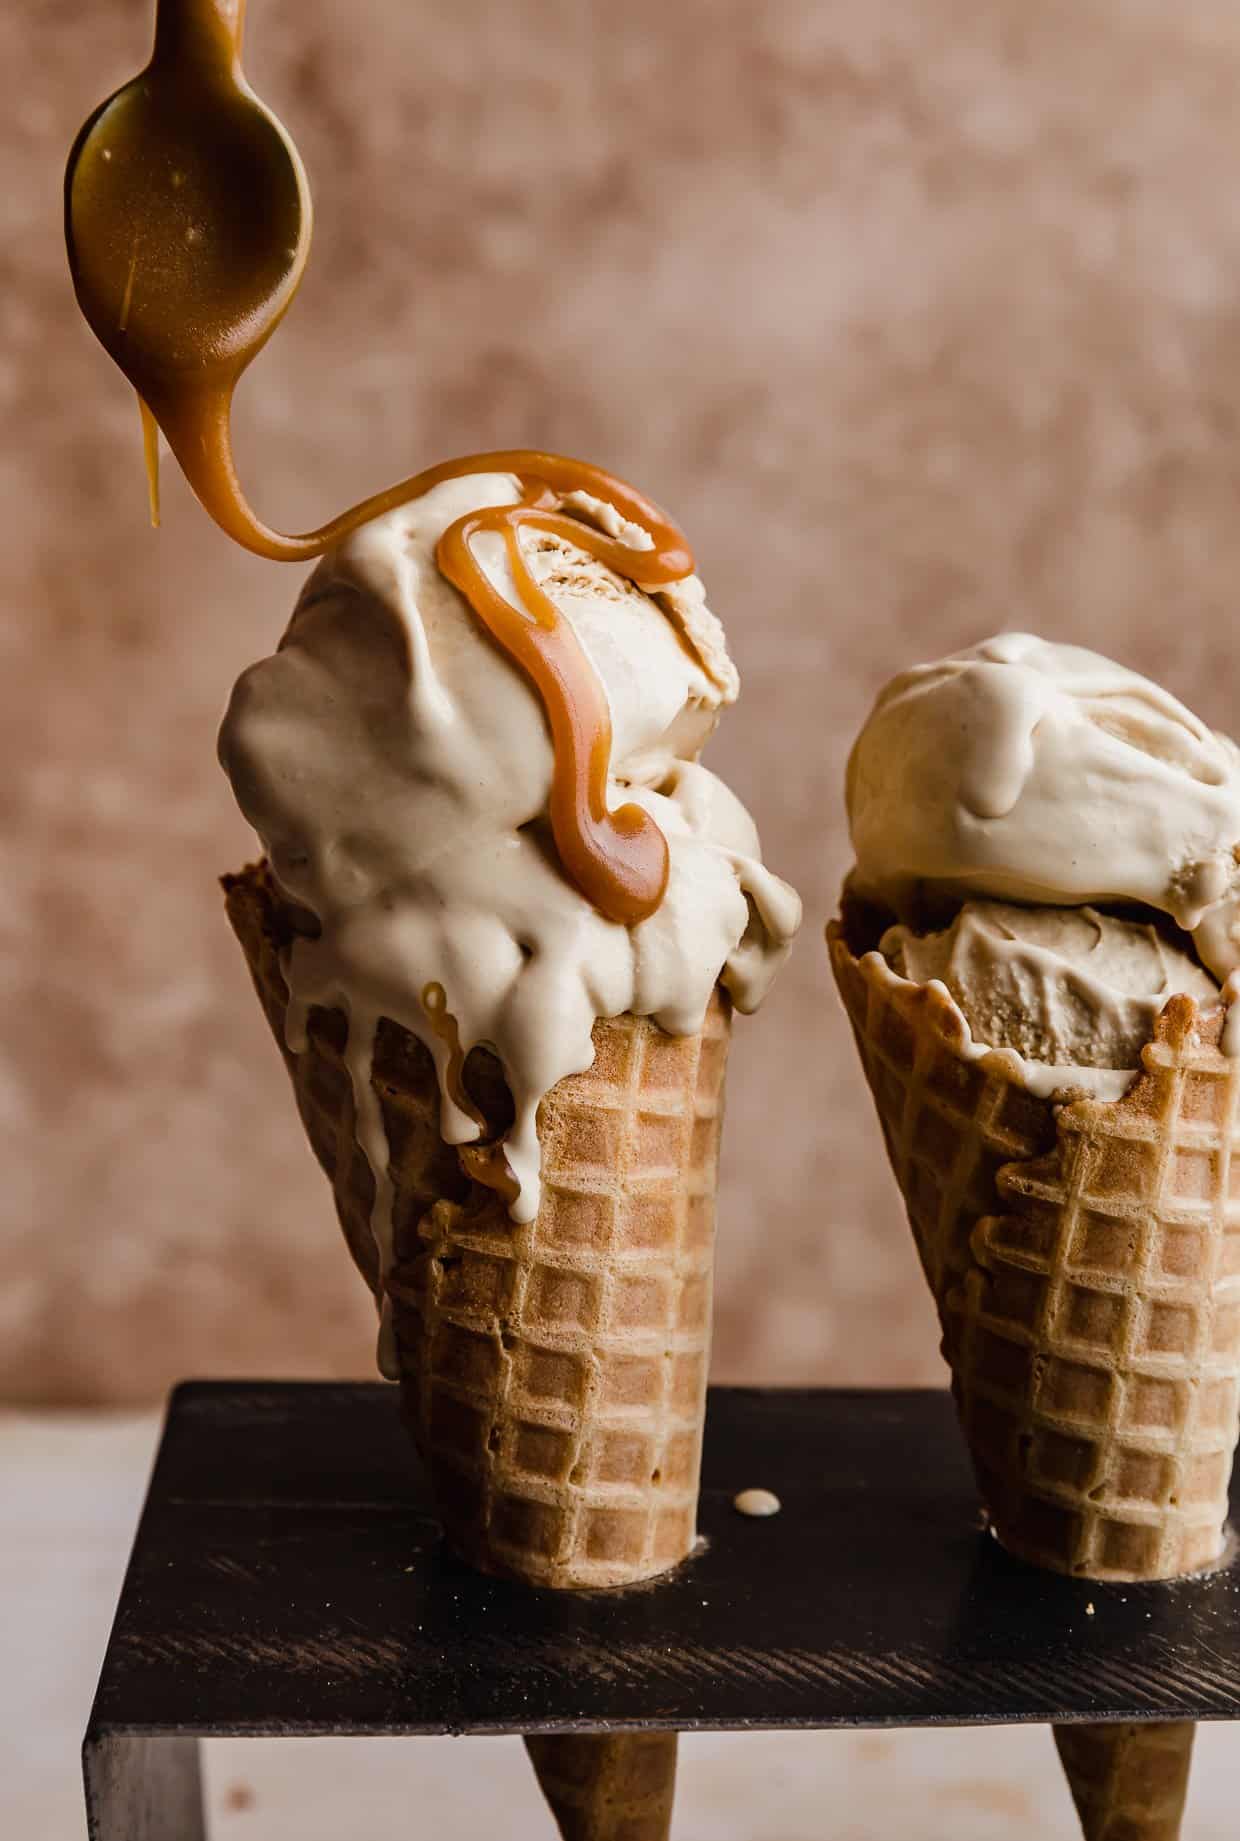 Butterscotch sauce being drizzled overtop Butterscotch Ice Cream that's in a waffle cone.